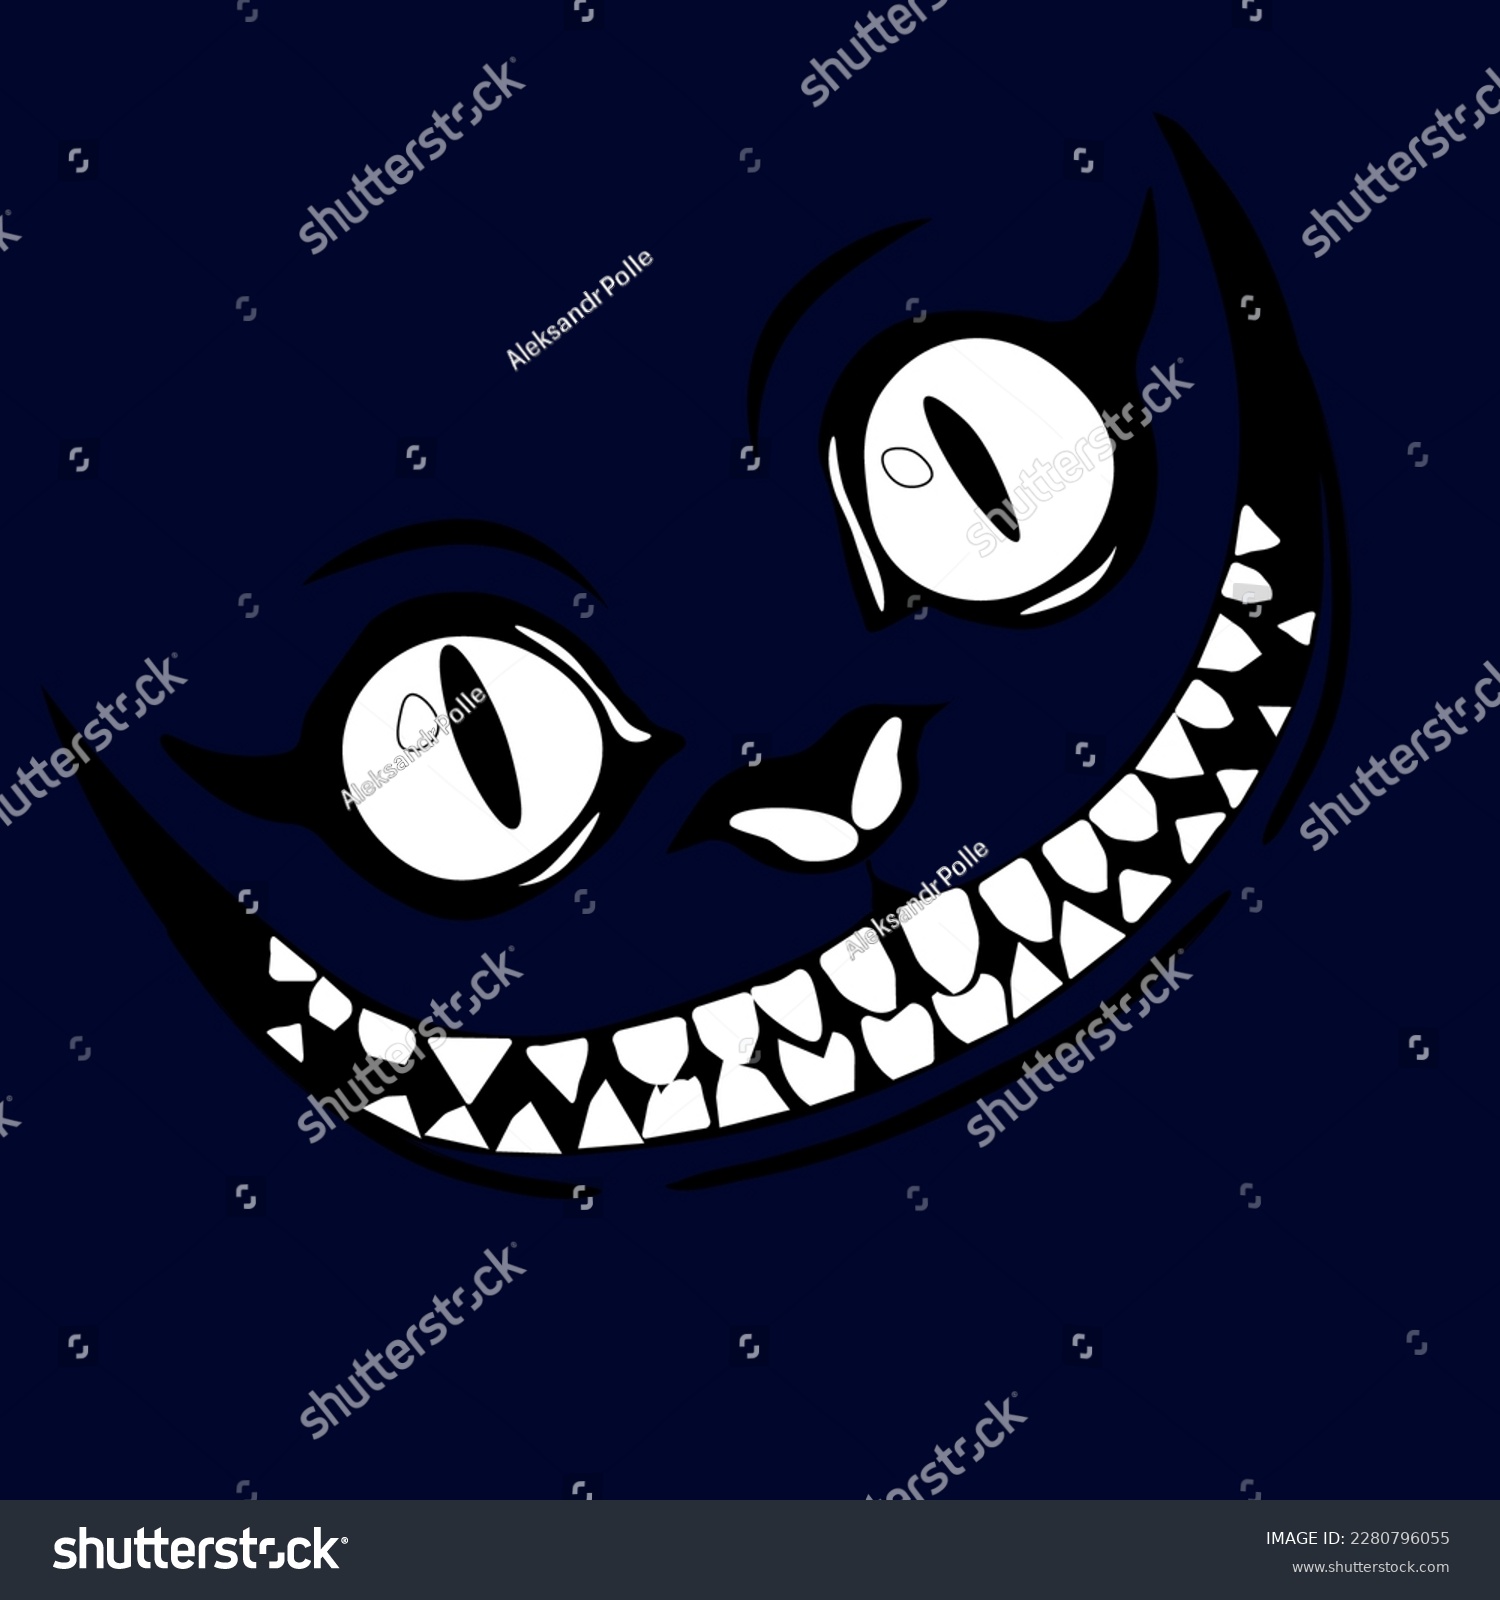 SVG of cheshire cat smile on blue background svg